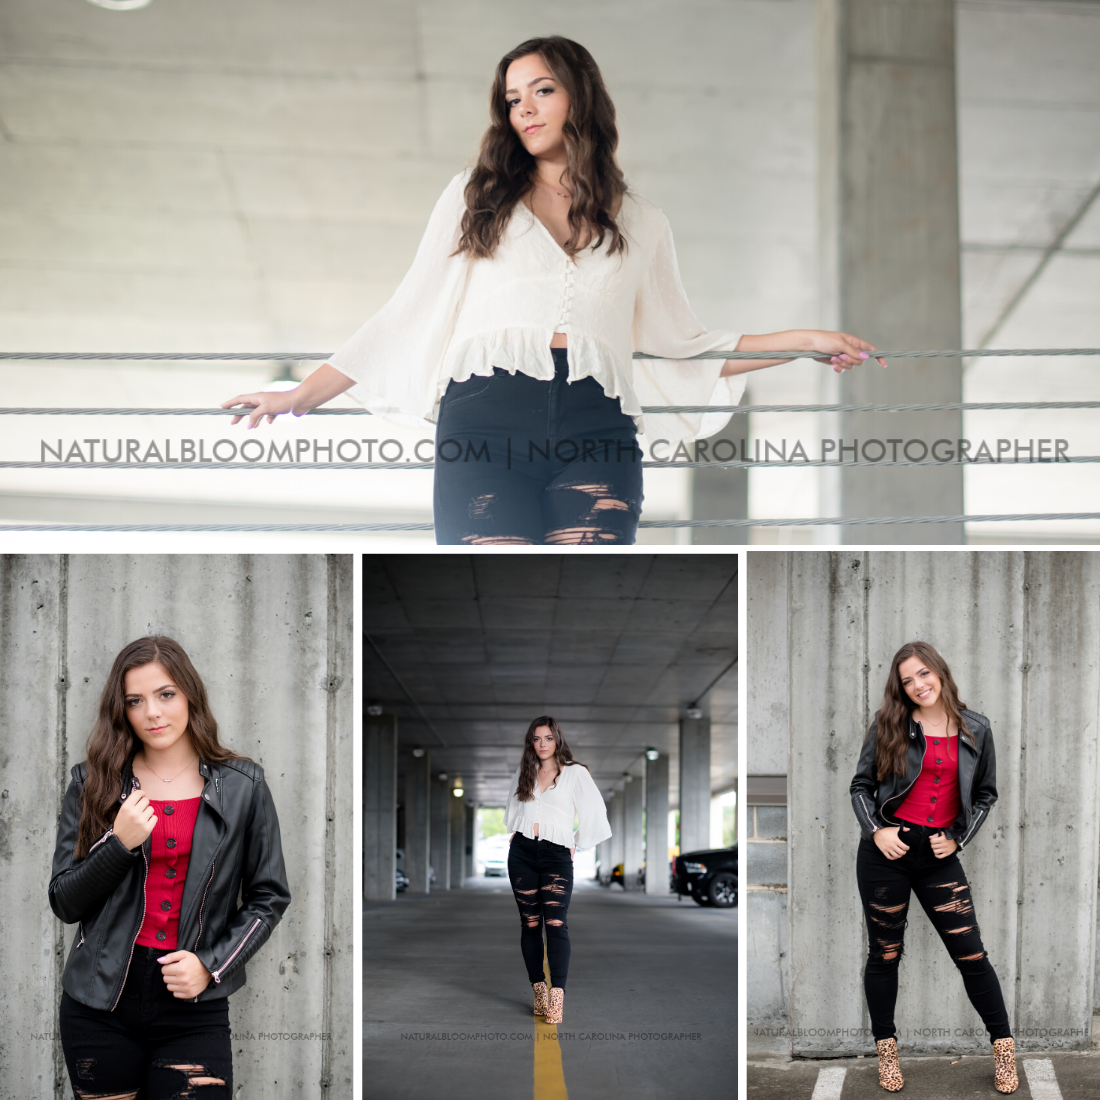 Urban style senior pictures of girl in parking garage with black leather jacket and red shirt